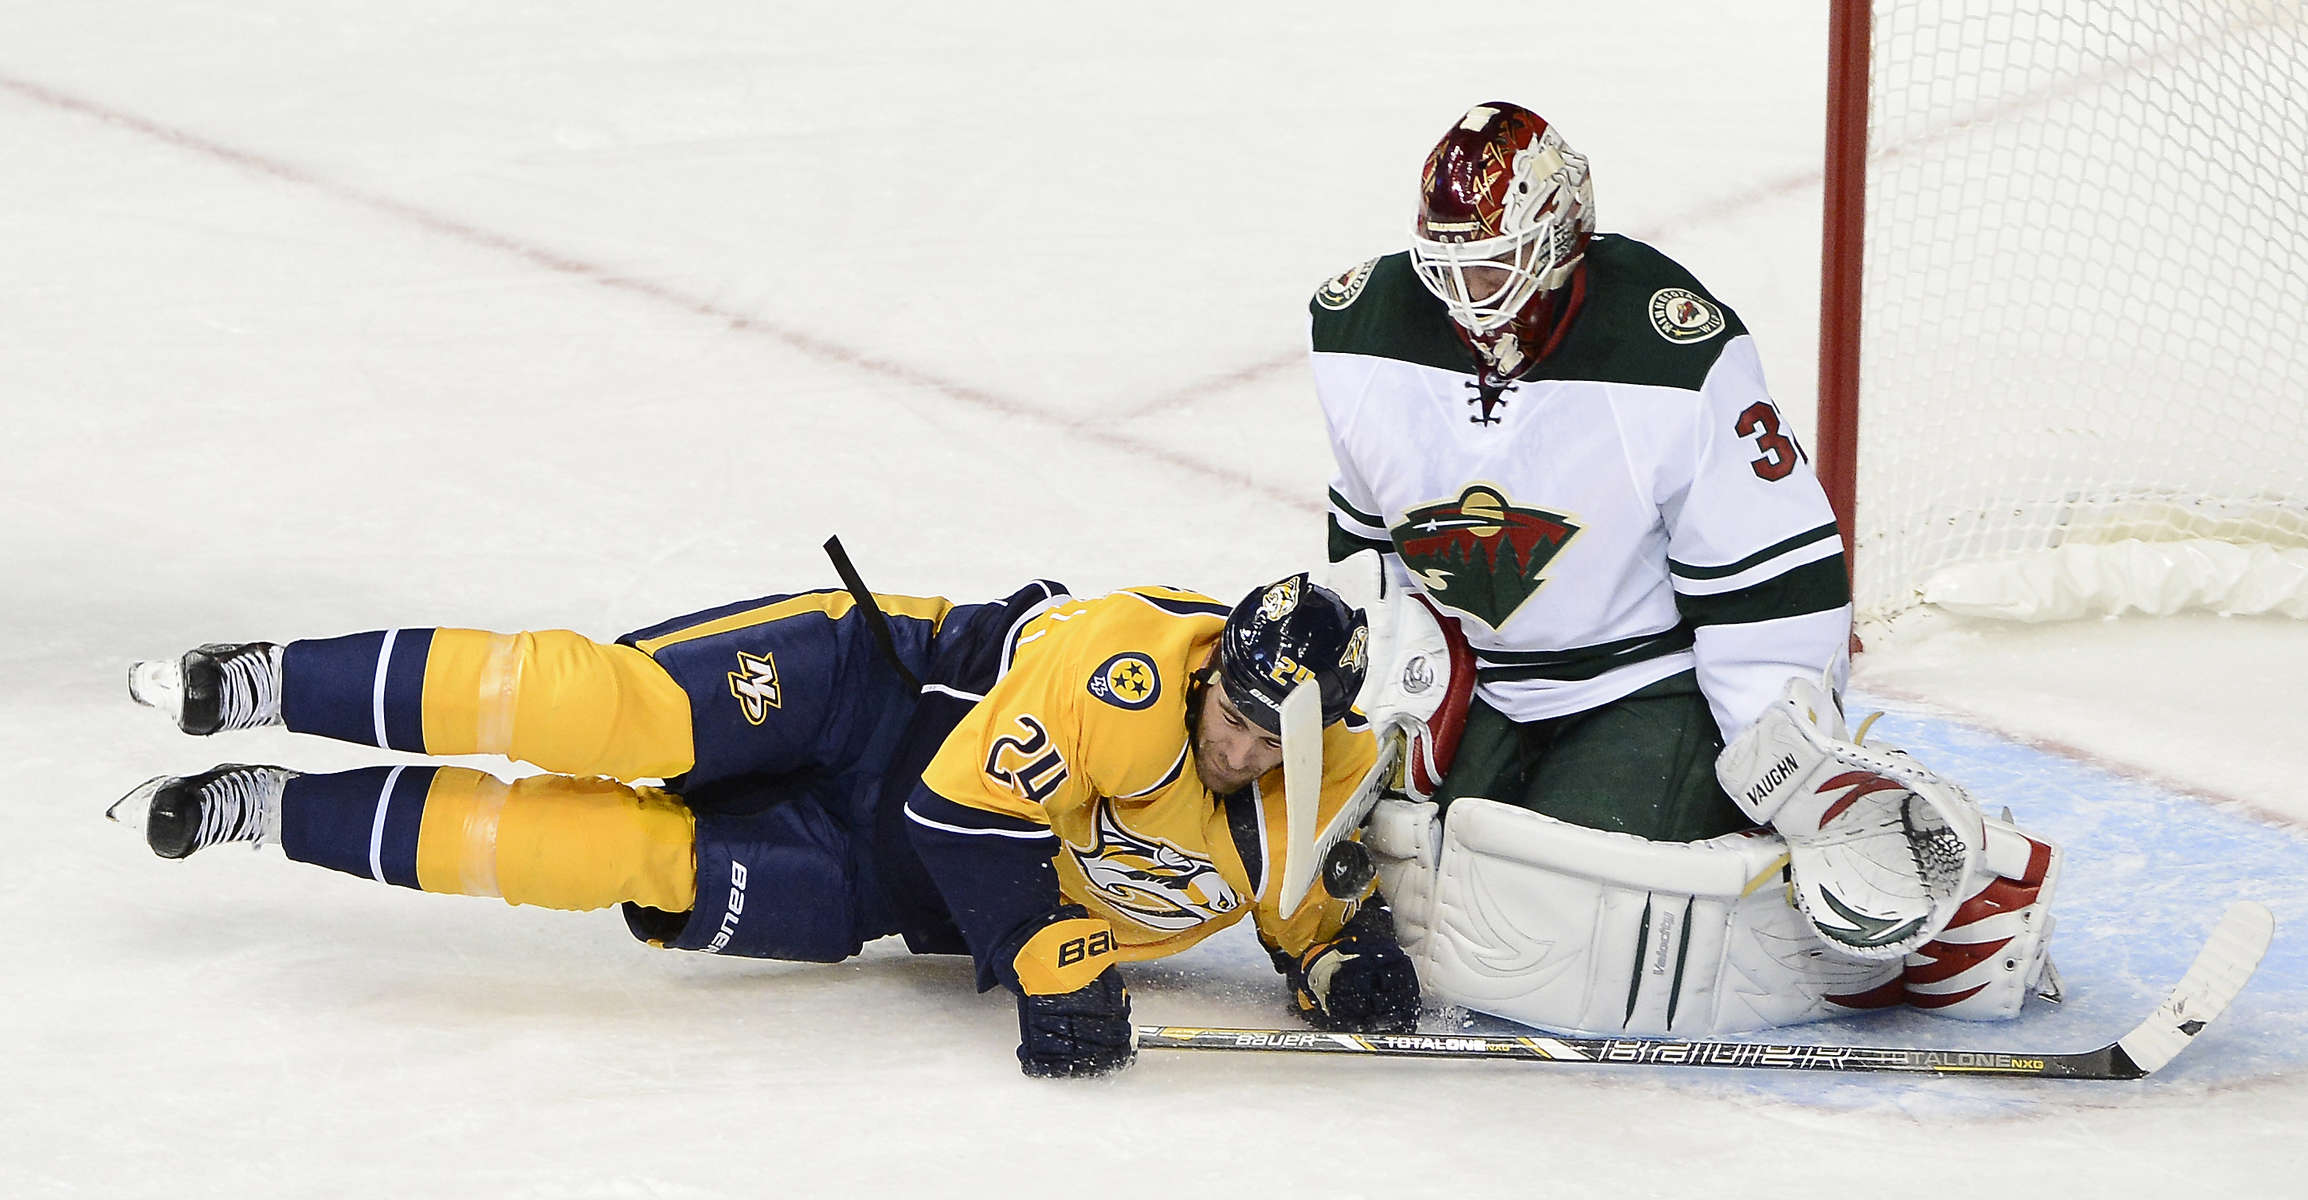 Nashville Predators forward Eric Nystrom collides with Minnesota Wild goalie Niklas Backstrom after being slashed resulting in a penalty shot in the first period of an NHL hockey game on Oct. 8, 2013, in Nashville, Tenn. (The Tennessean/ Mark Zaleski)